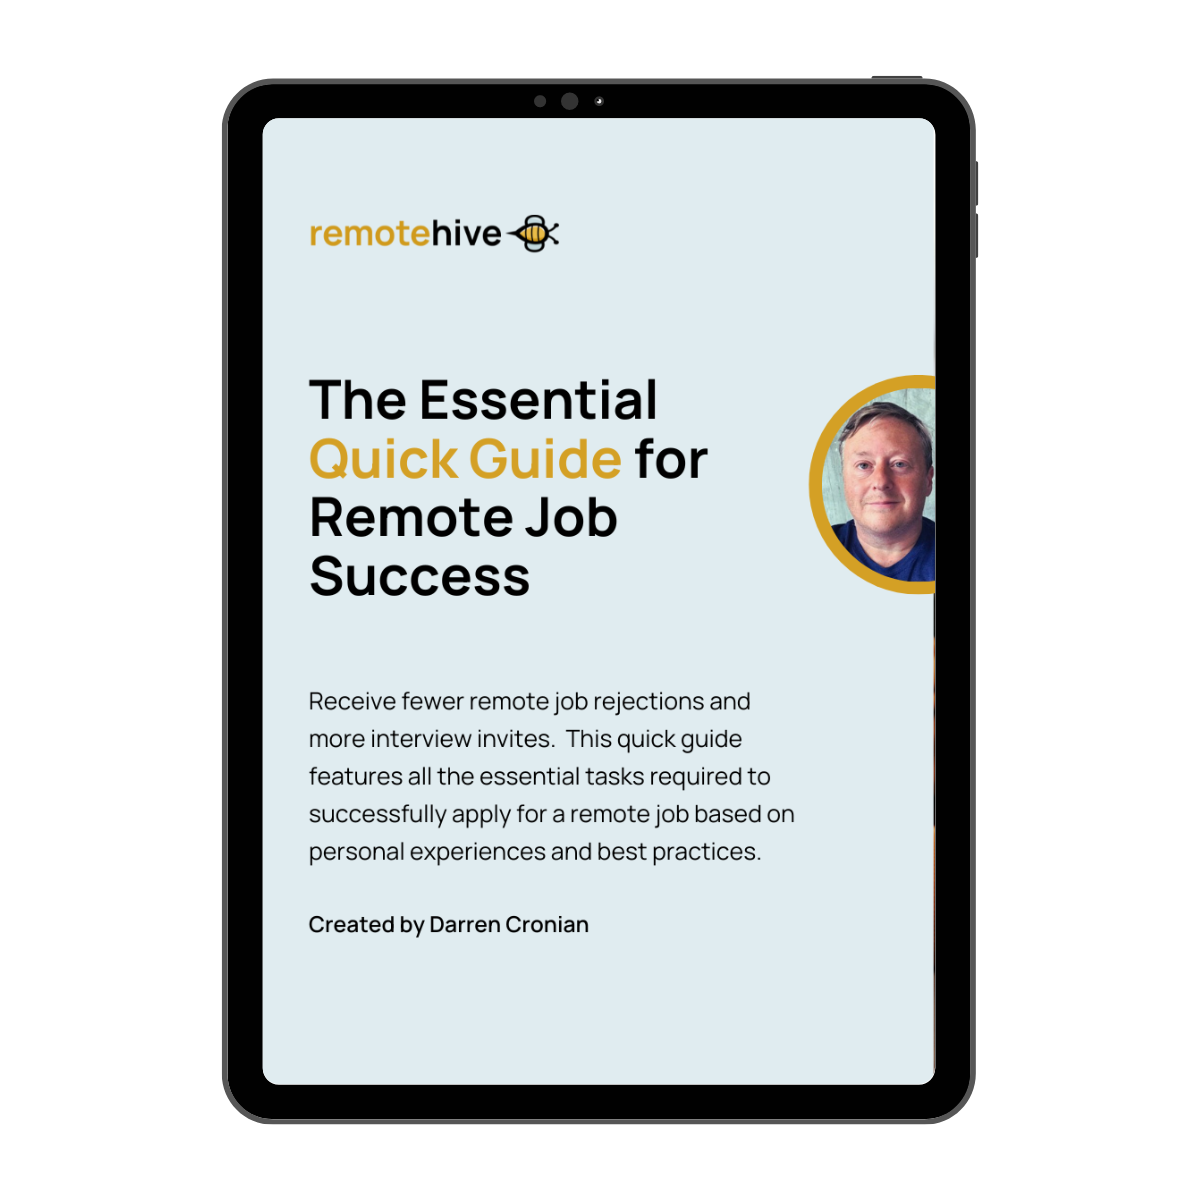 The Essential Quick Guide for Remote Job Success